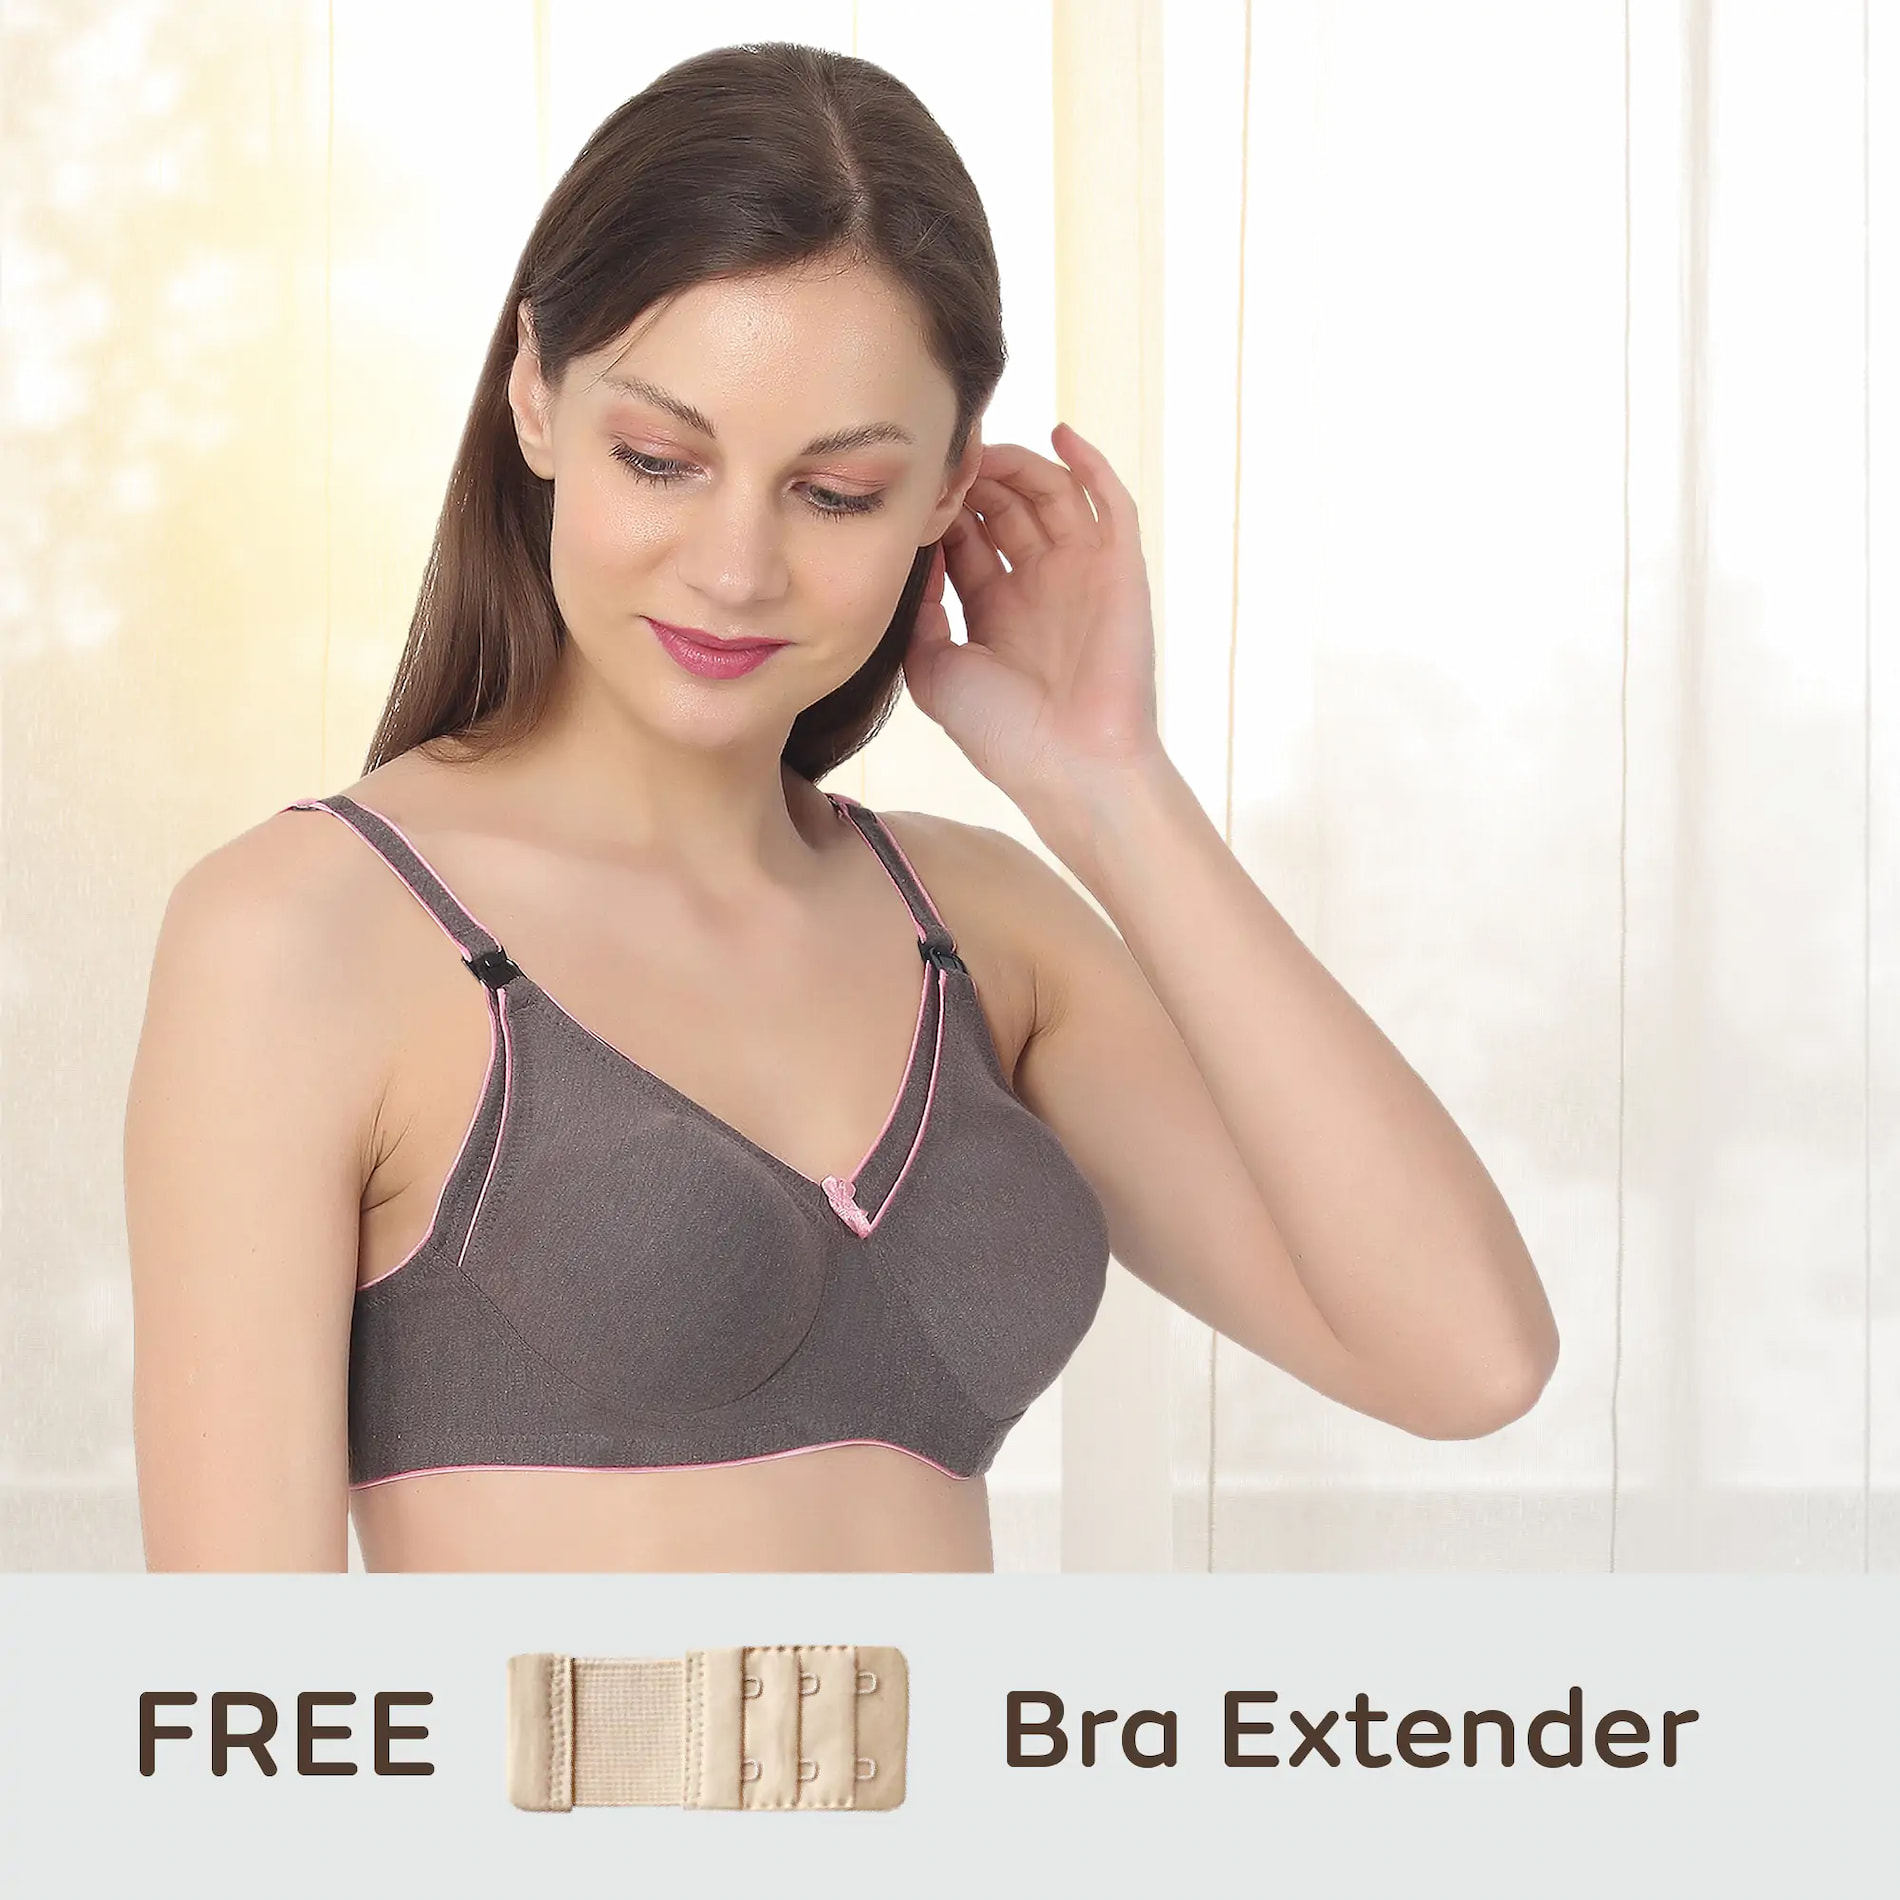 Maternity/Nursing Moulded Cup Extra Comfort Bra with free Bra Extender - Dusty Grey Melange 32B 